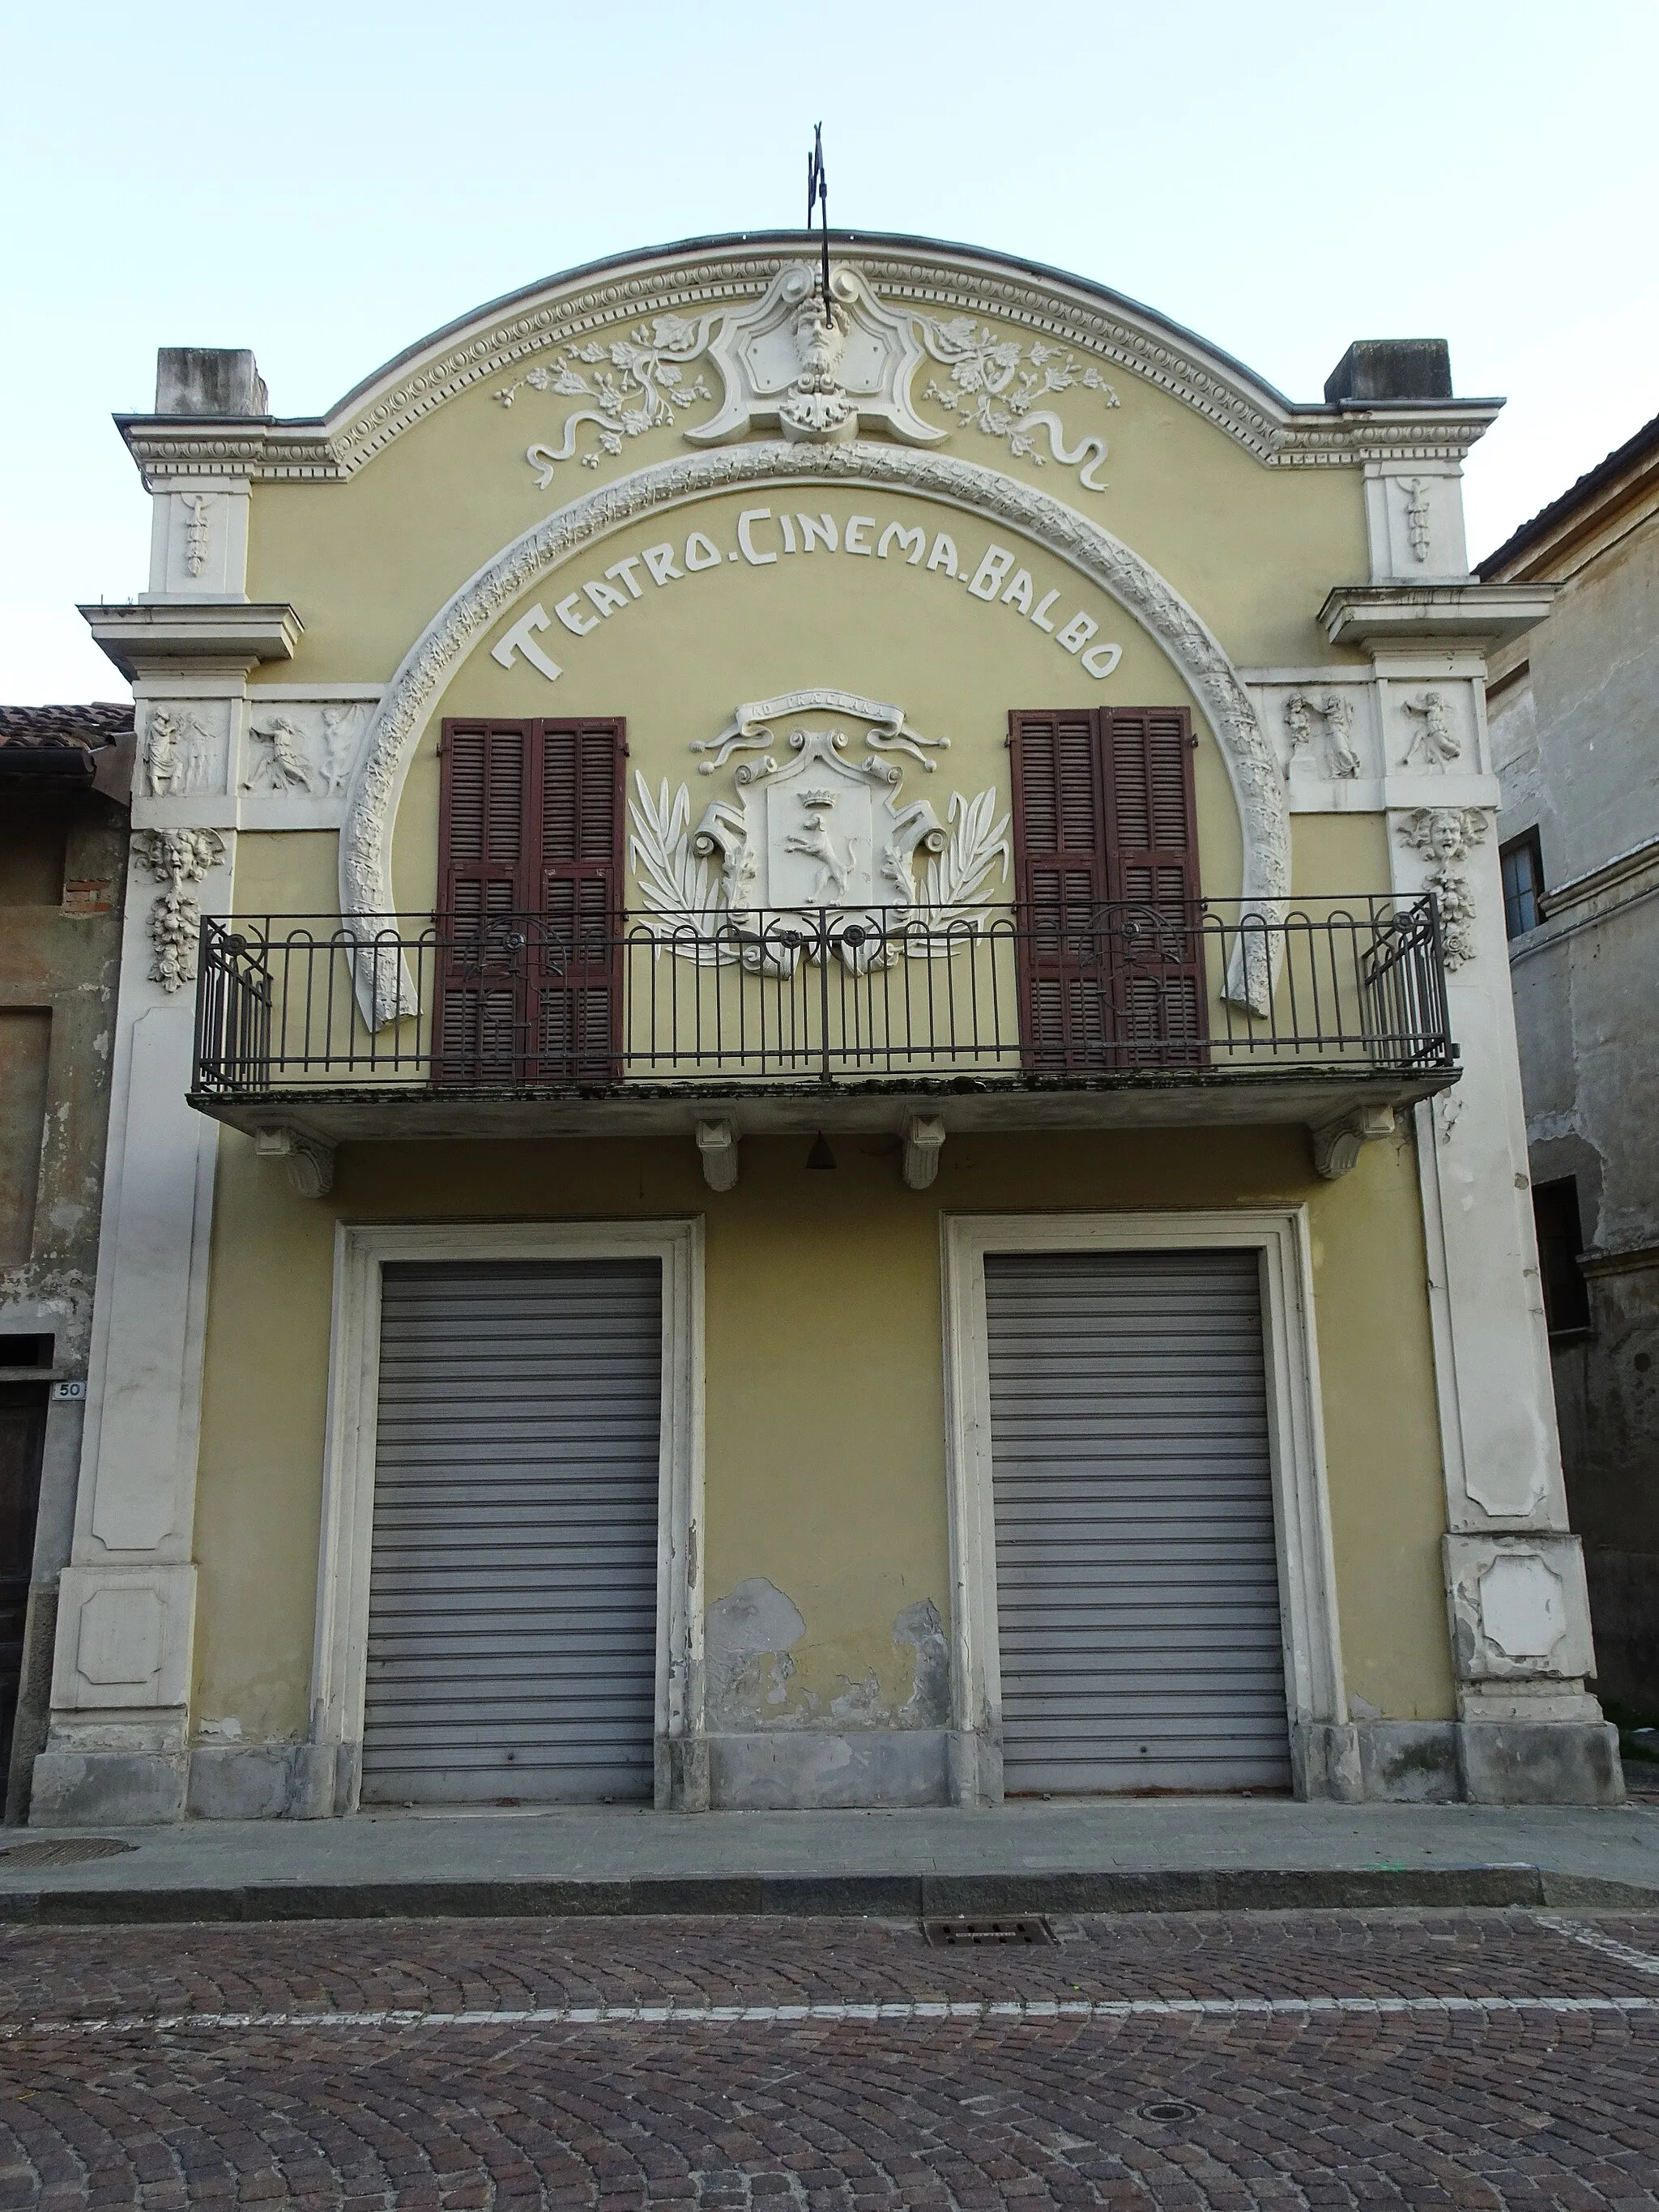 Photo showing: The view in front of the old Balbo Cinema-Thatre in Canelli.